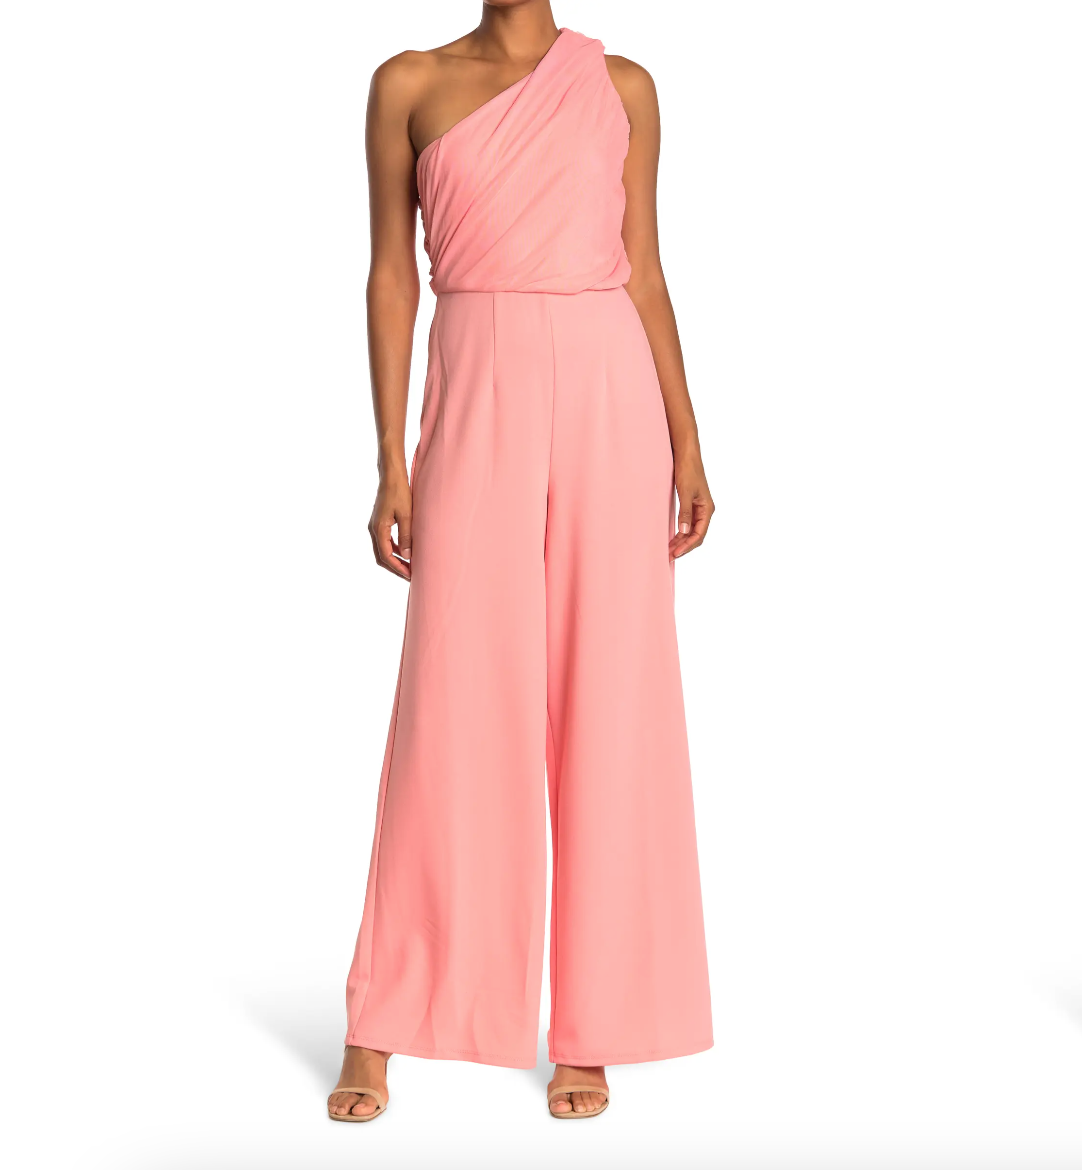 Nordstrom Rack: Save up to 65% on wedding guest styles